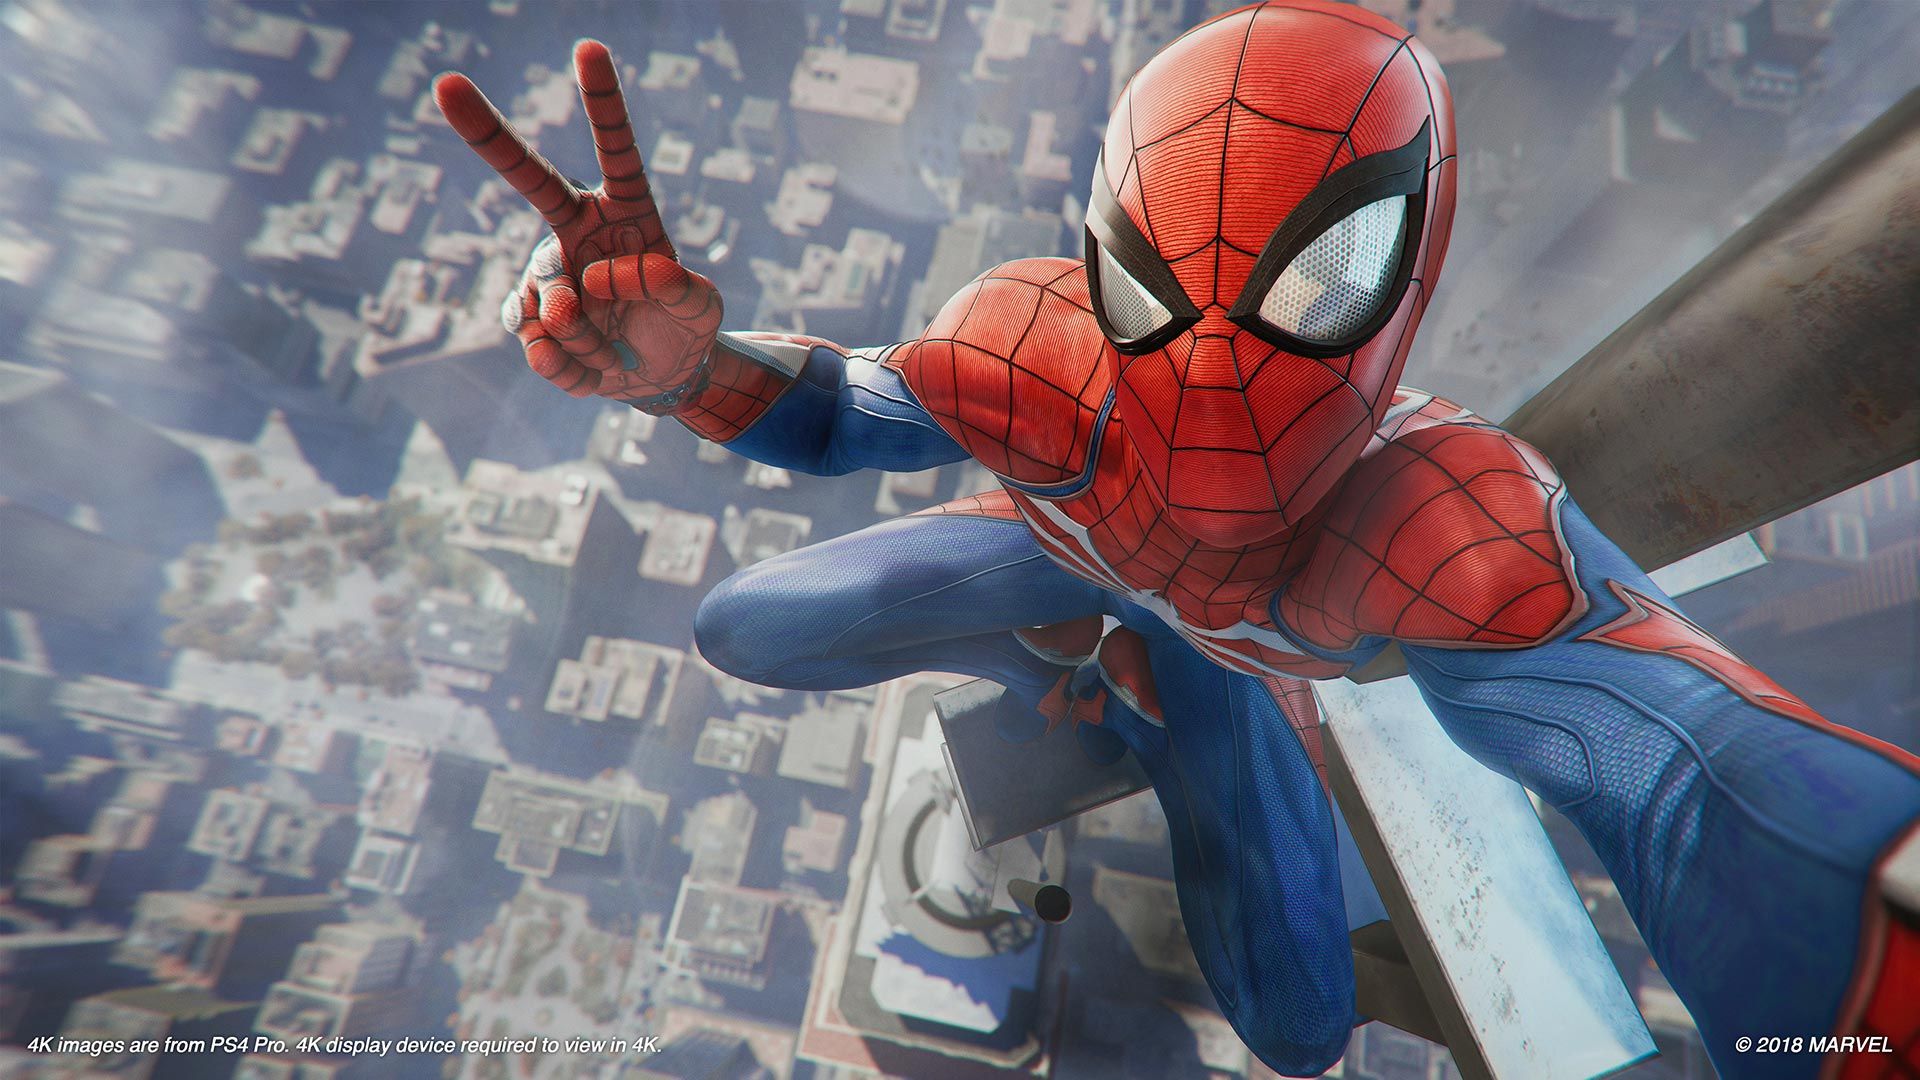 Opinion: Avengers' Spider Man PS4 Exclusivity Hurts Everyone